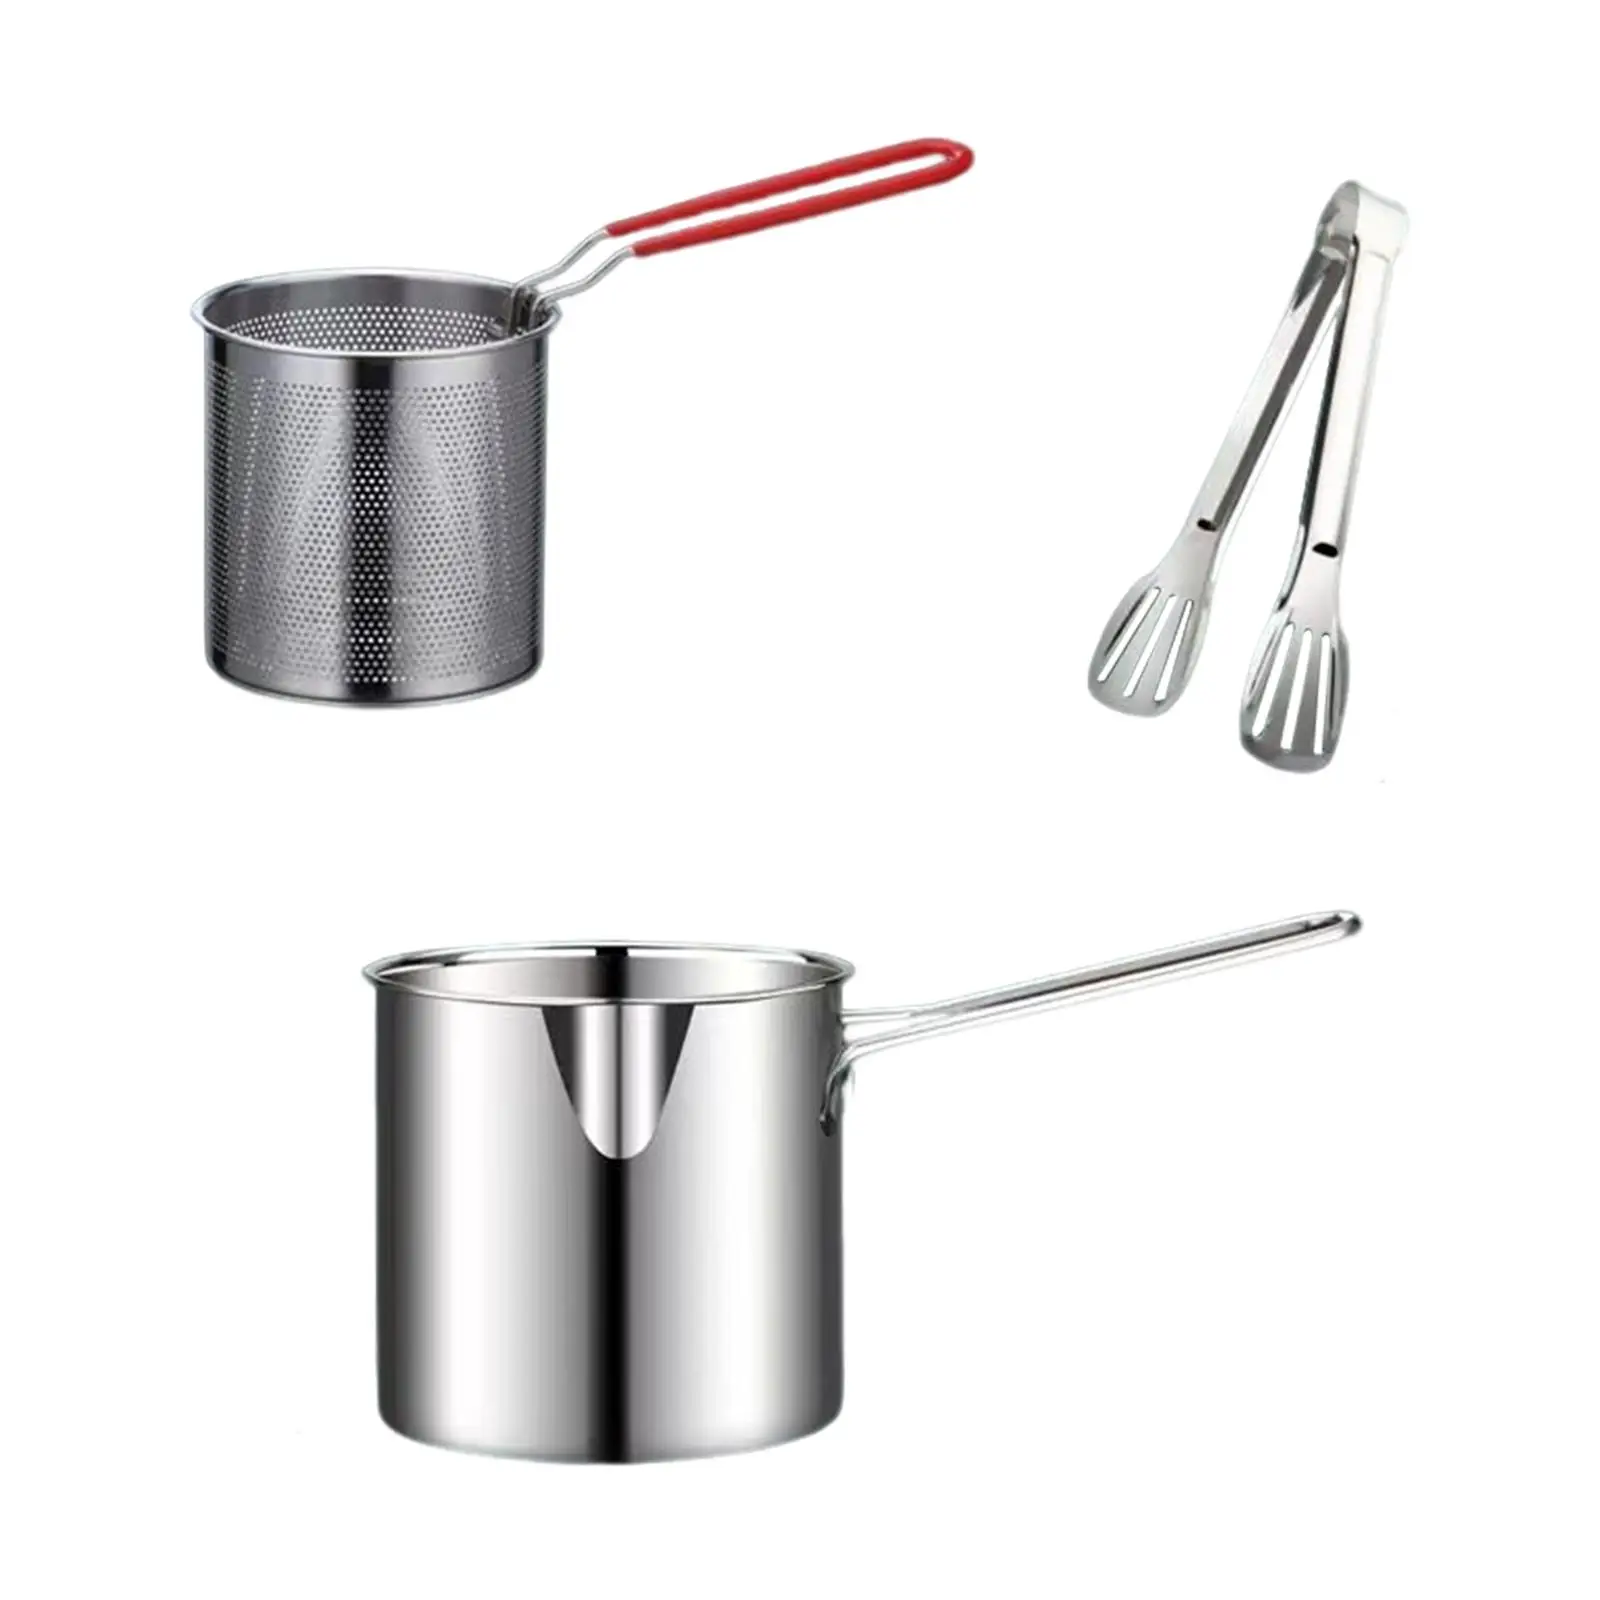 Multipurpose Deep Frying Pot Stainless Steel with Handles Milk Pot Small Pot for Kitchen Backpacking Restaurant Home Camping